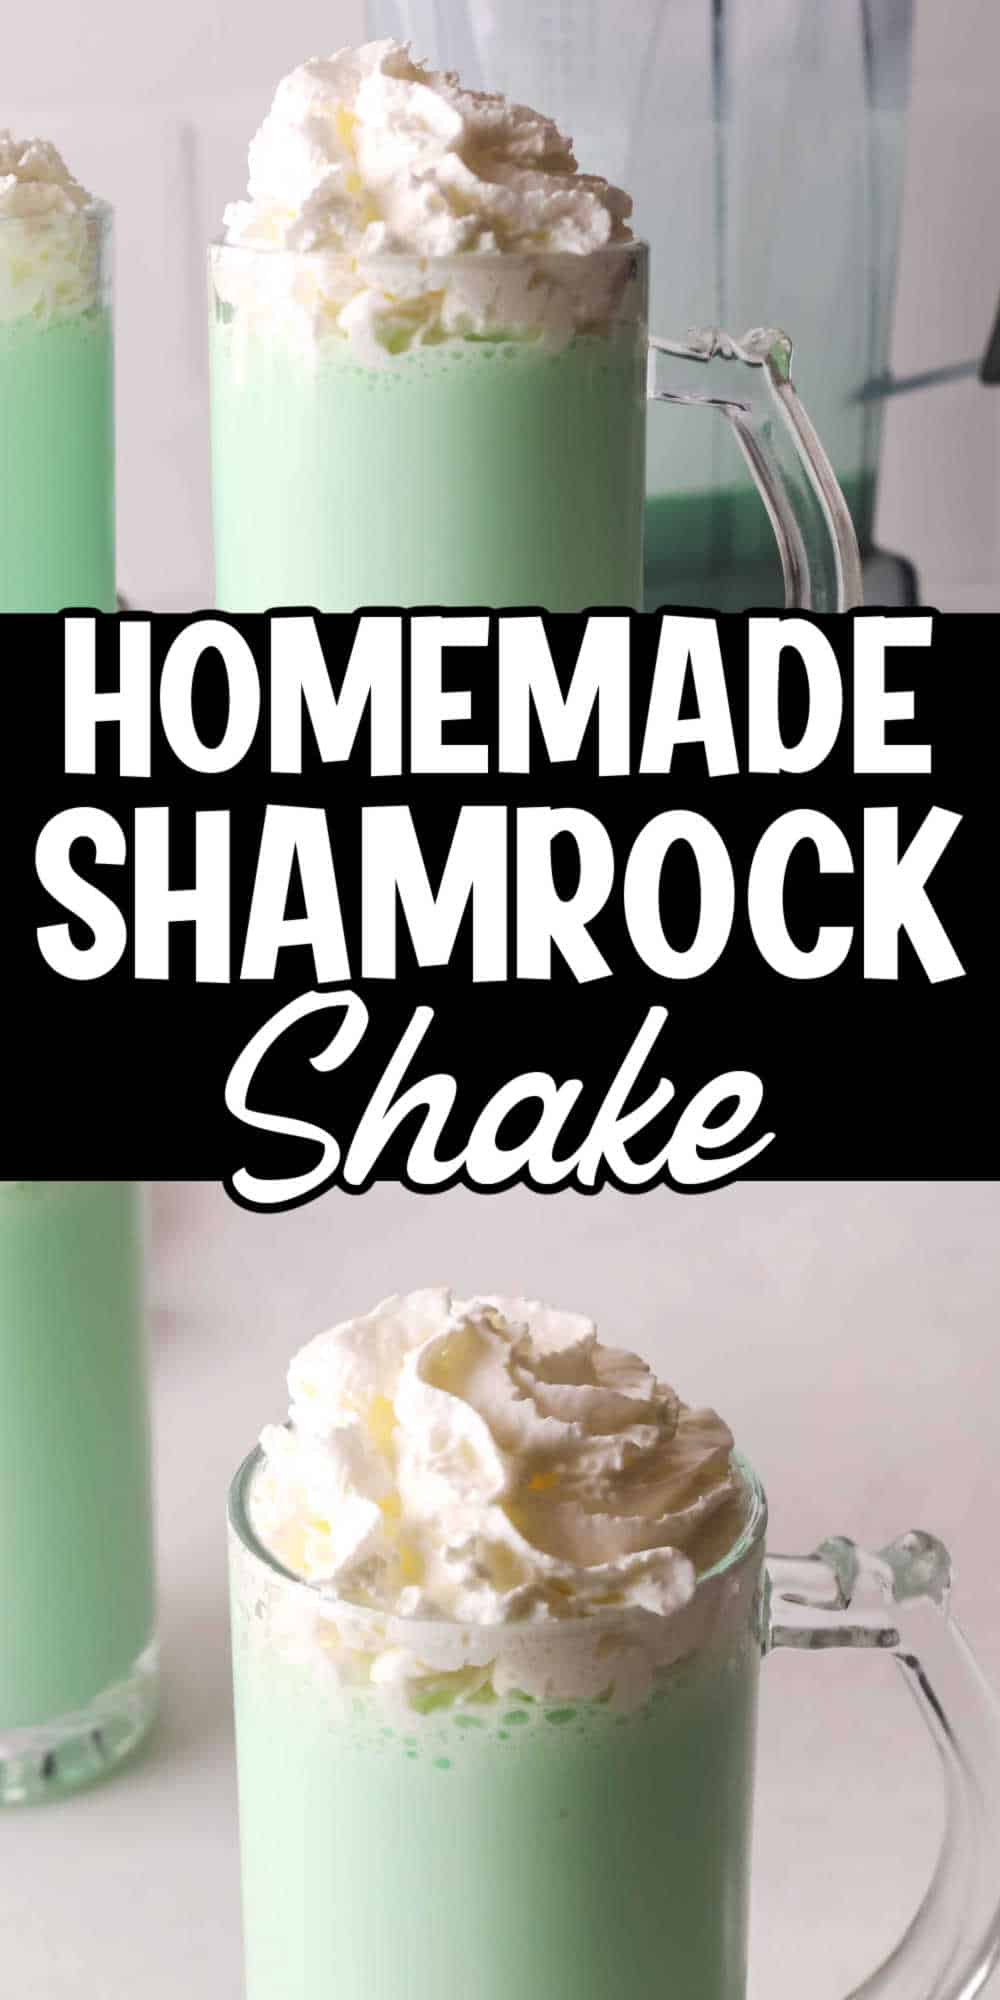 Pin image: top has closeup of a shamrock shake, middle says "Homemade Shamrock Shake" and bottom has a pic of the shamrock shake in a cup.